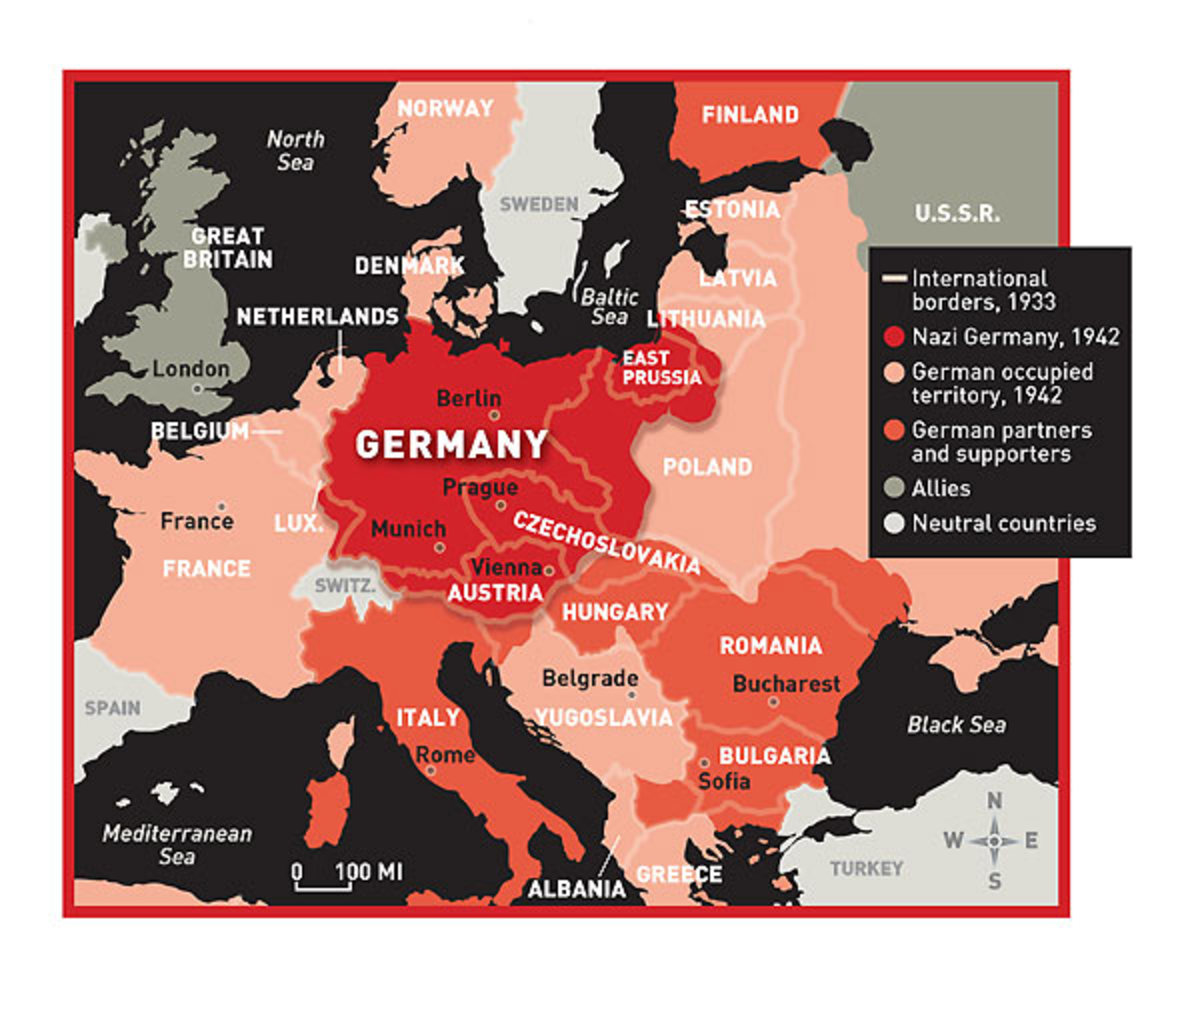 The expansion of Nazi Germany under Hitler's rule